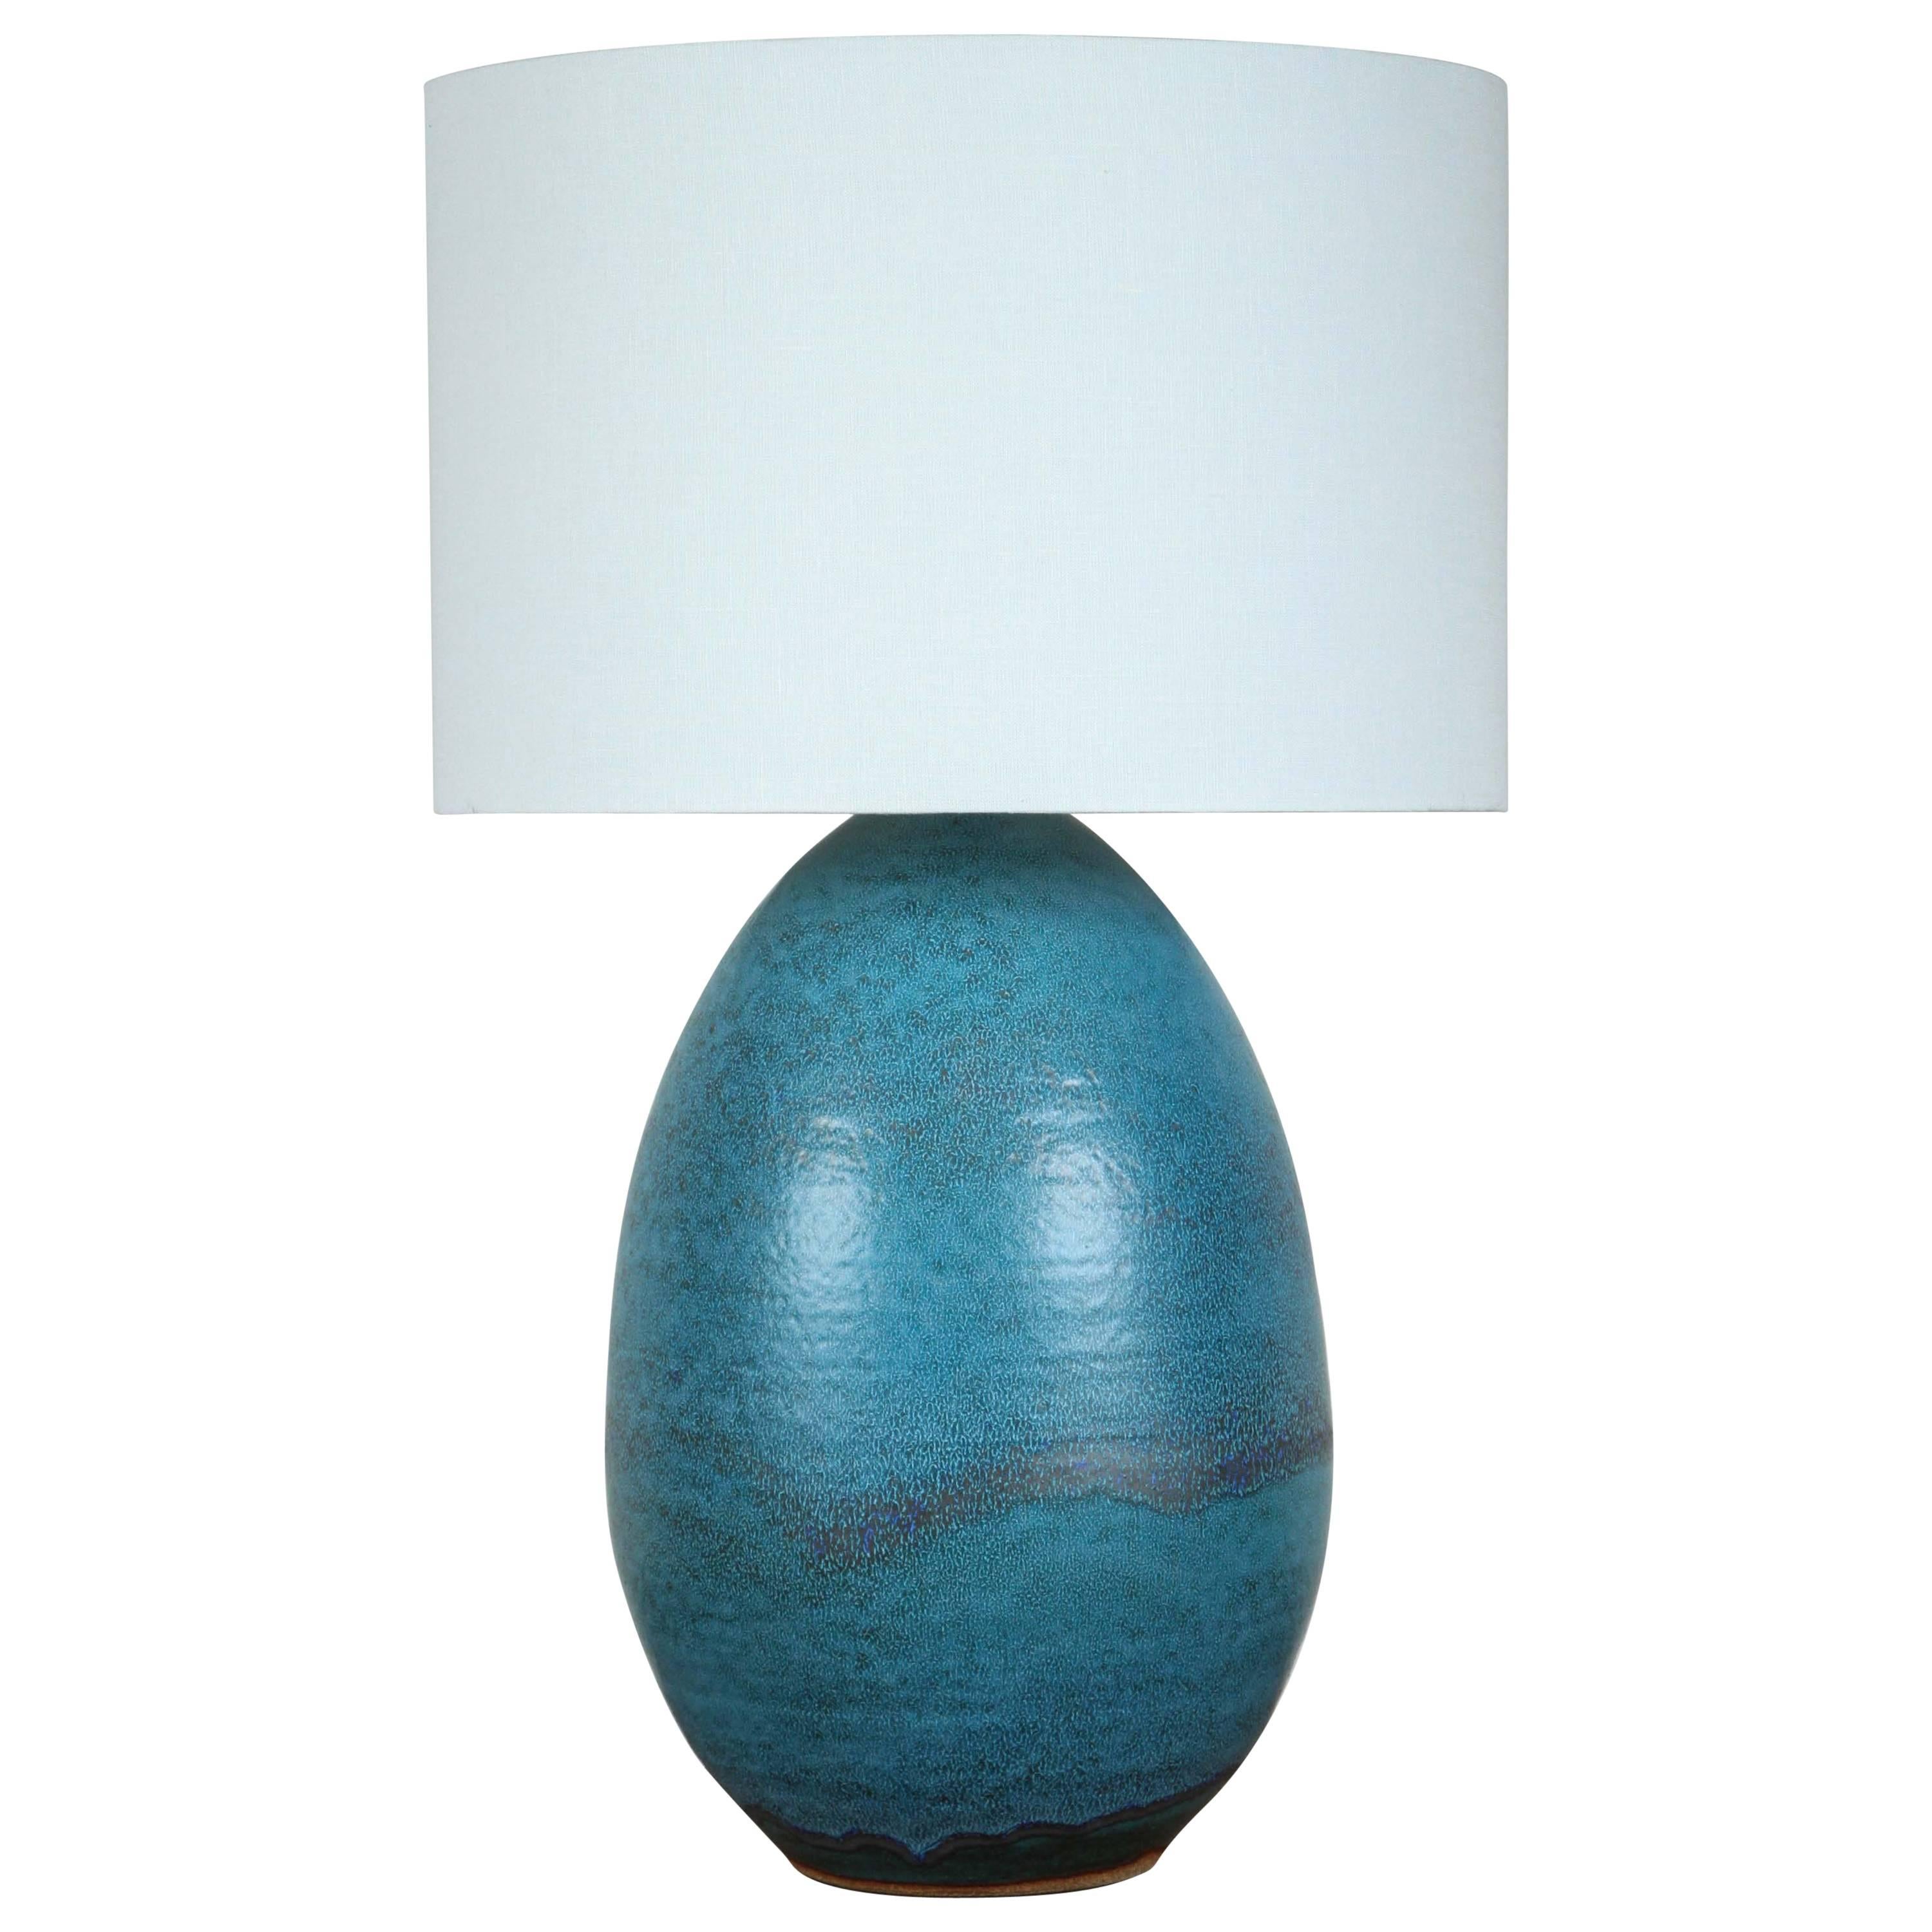 XL Ceramic Pod Lamp in Turquoise by Victoria Morris for Lawson-Fenning